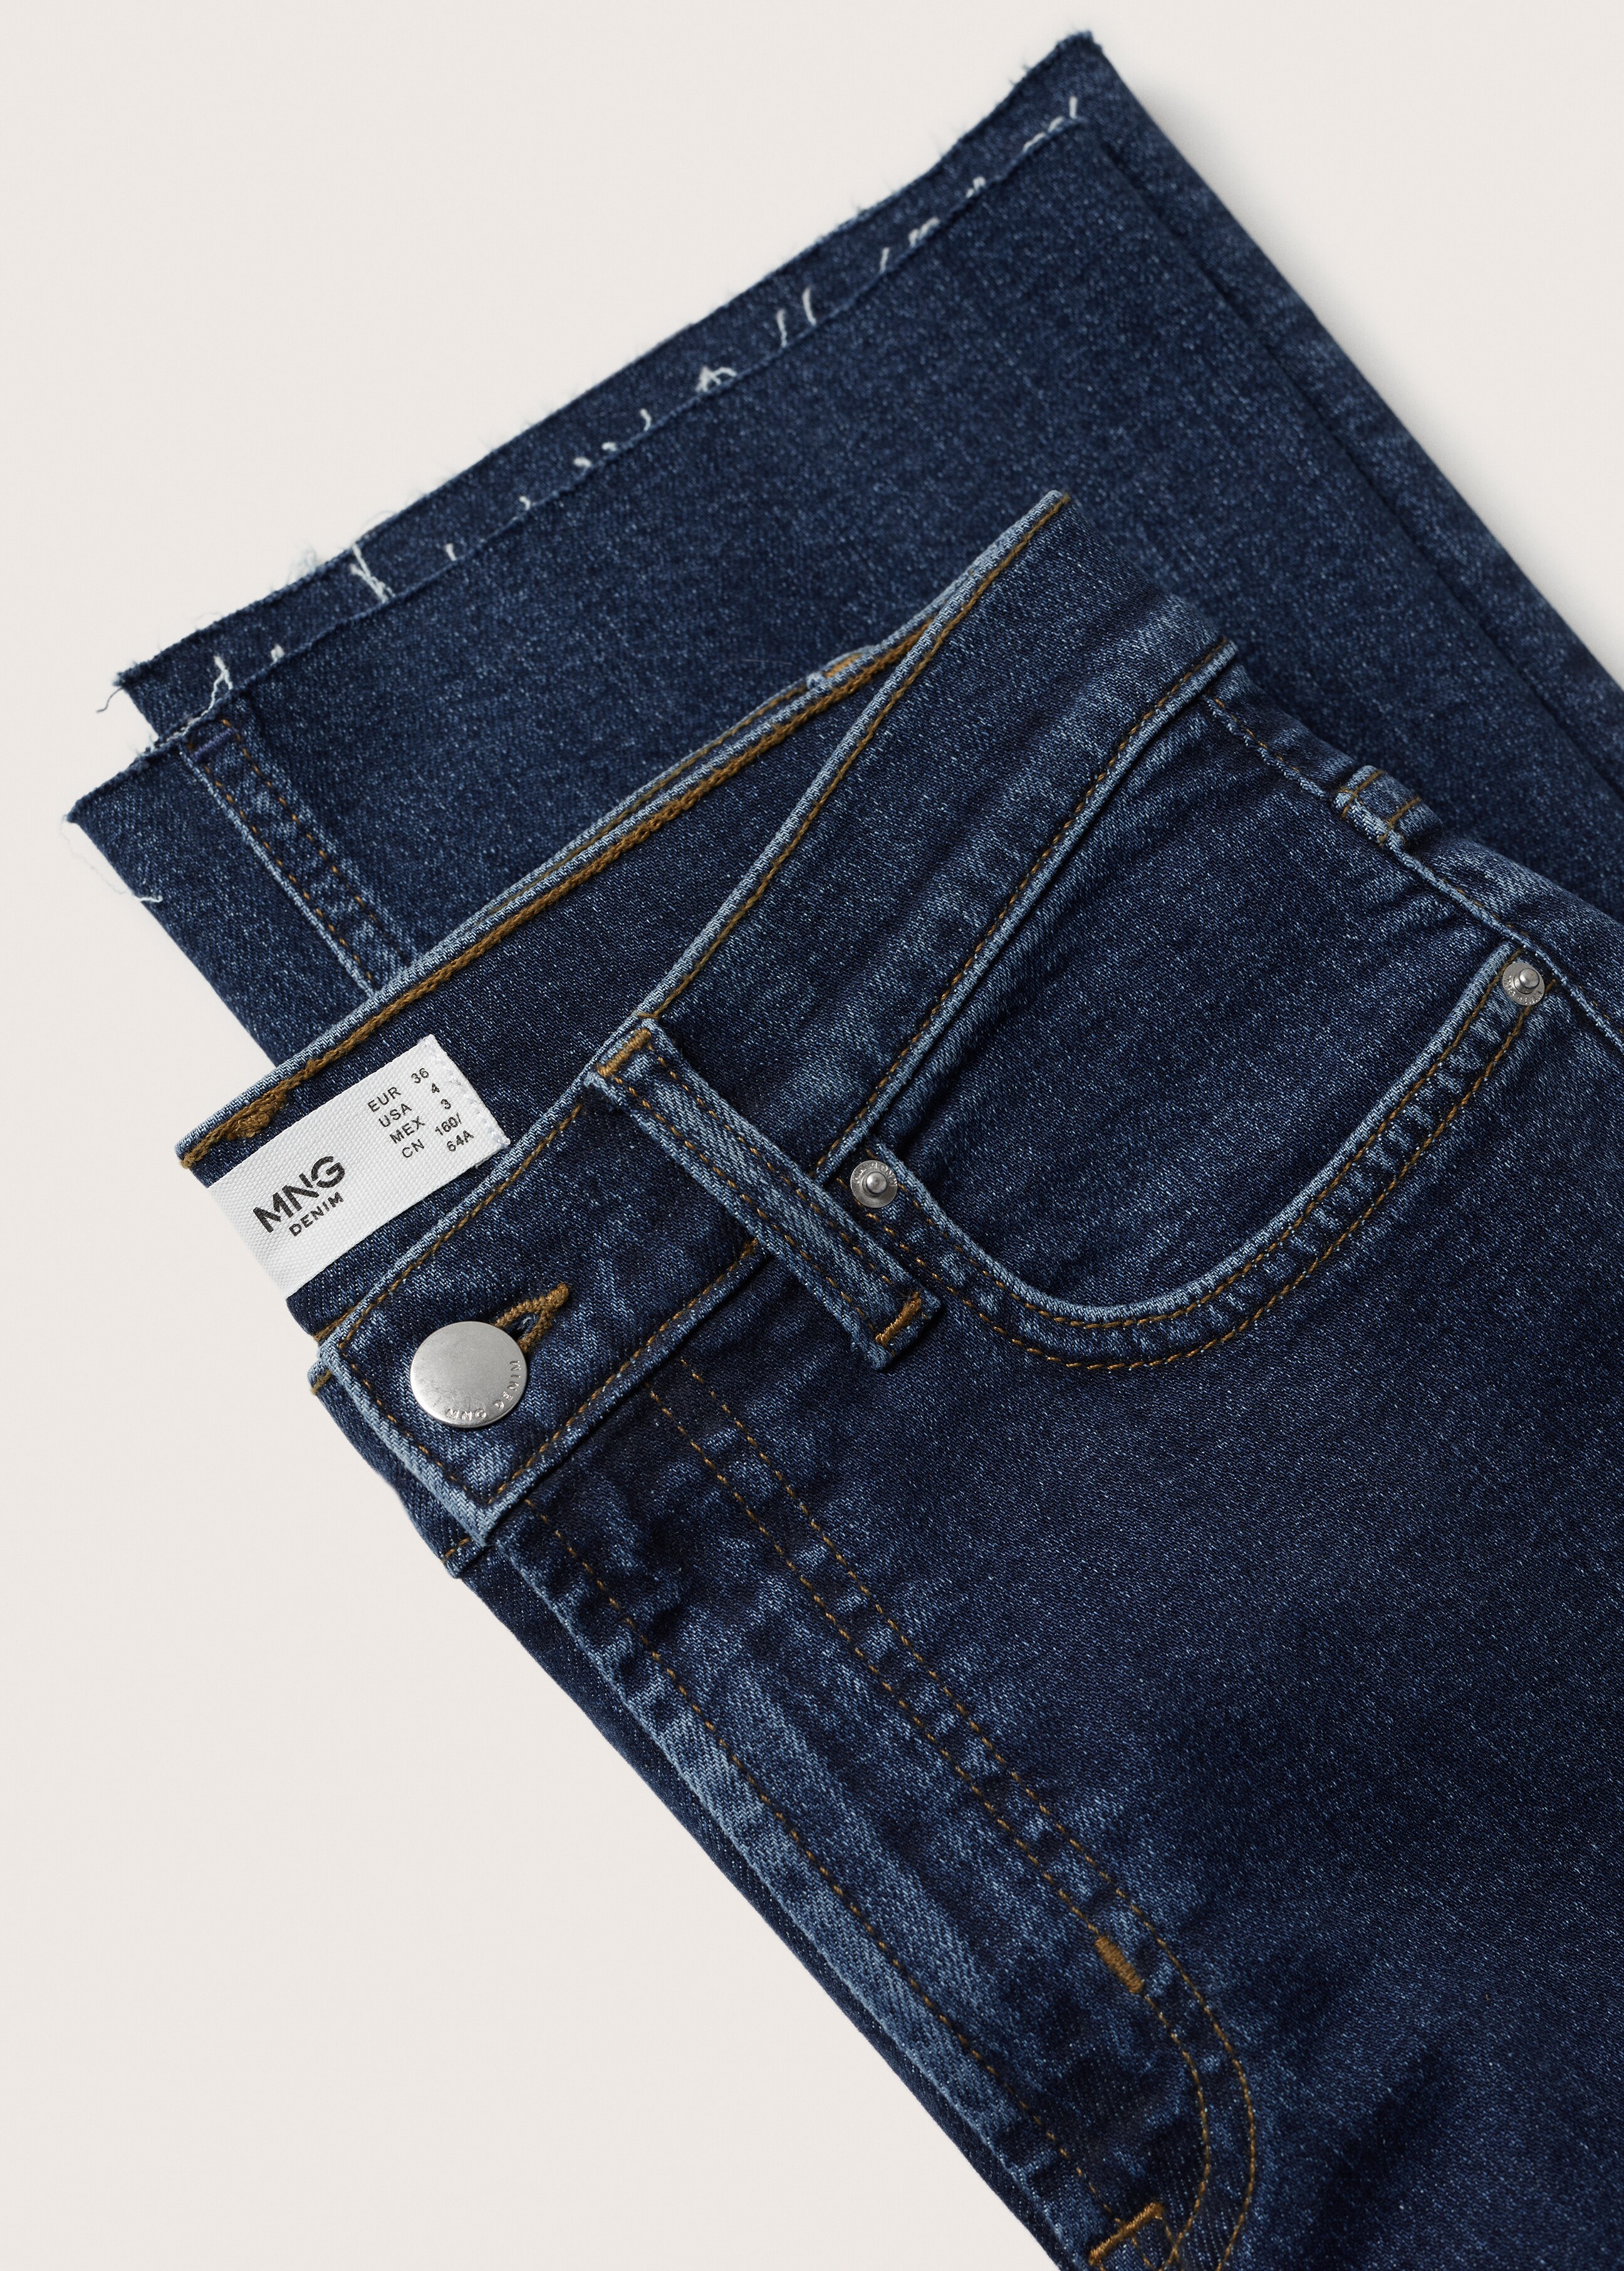 High-waist bootcut jeans - Details of the article 8